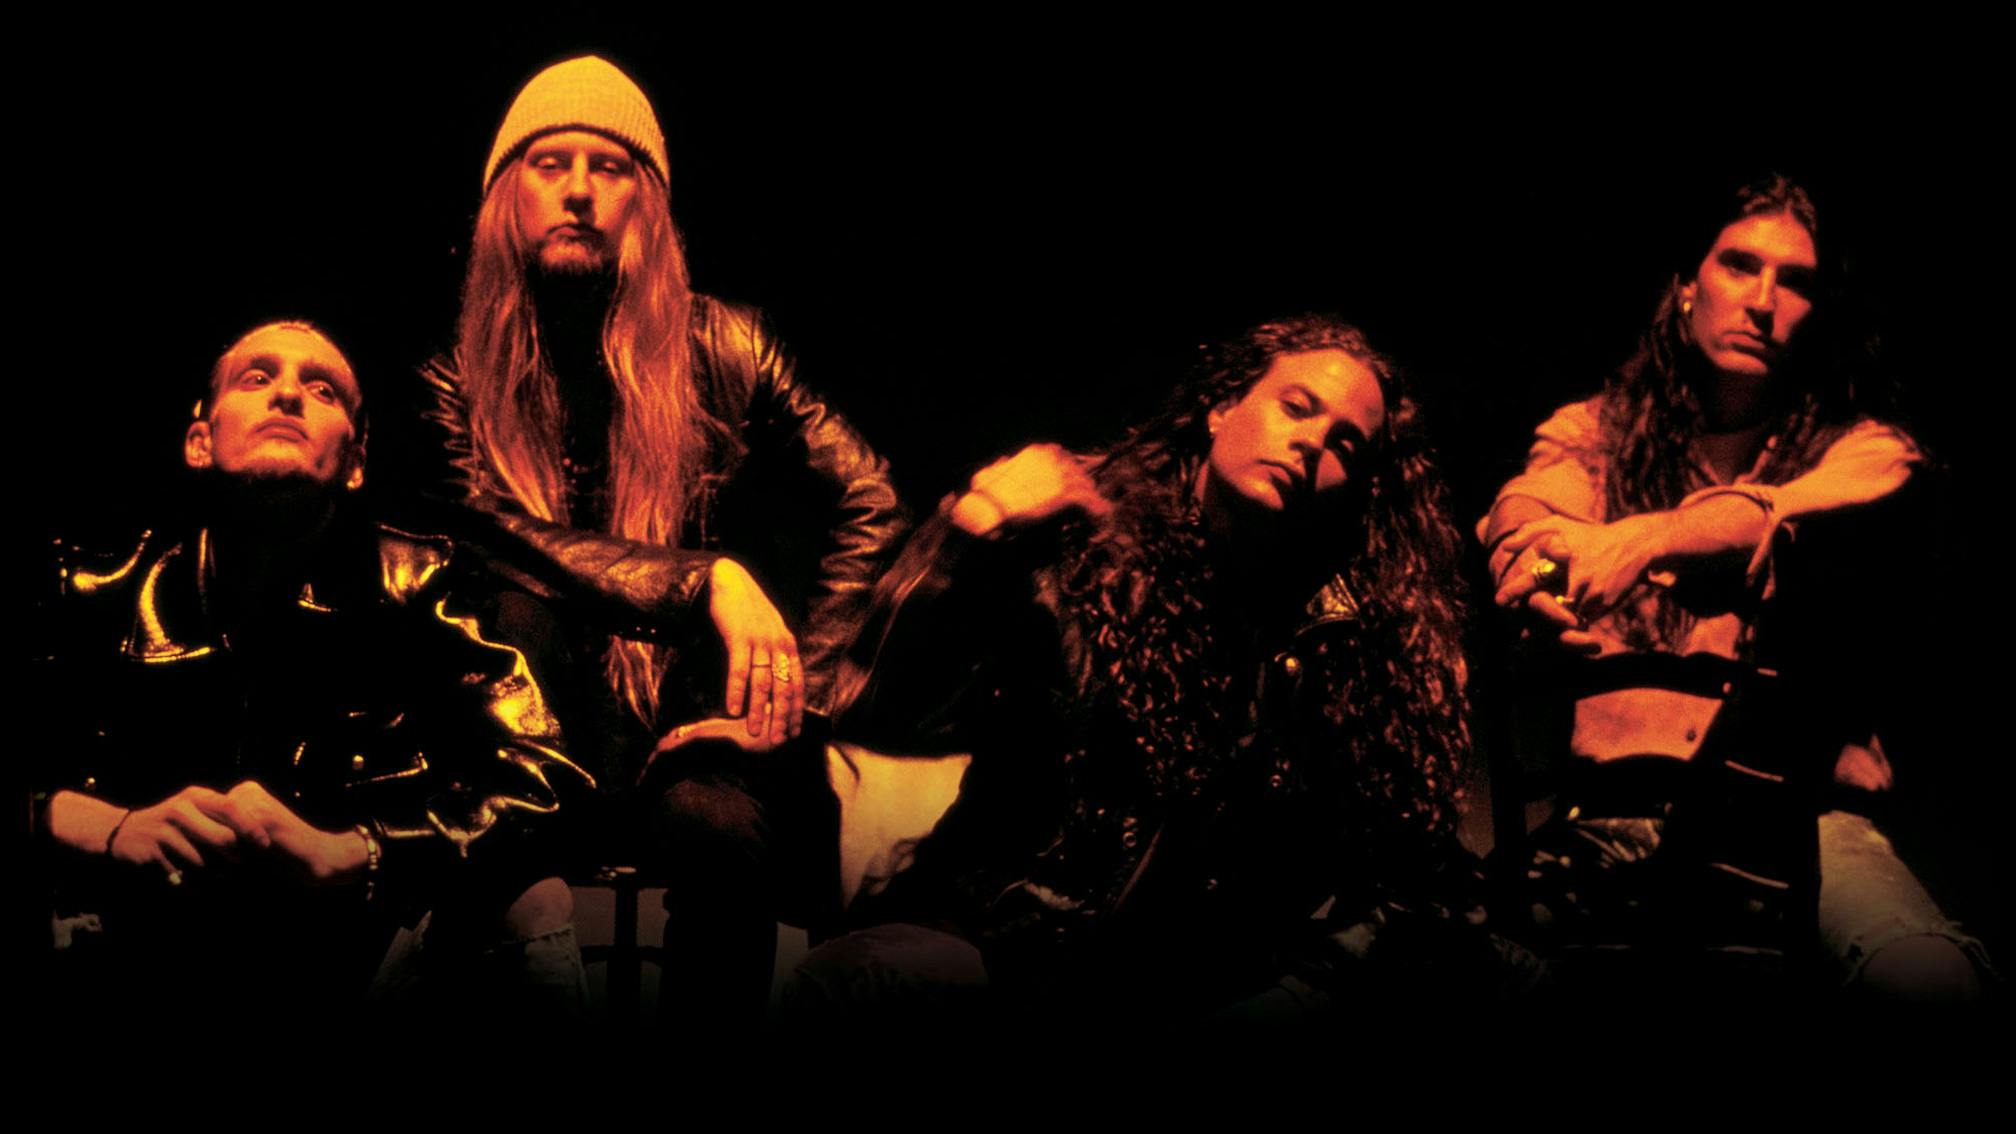 The 20 greatest Alice In Chains songs – ranked